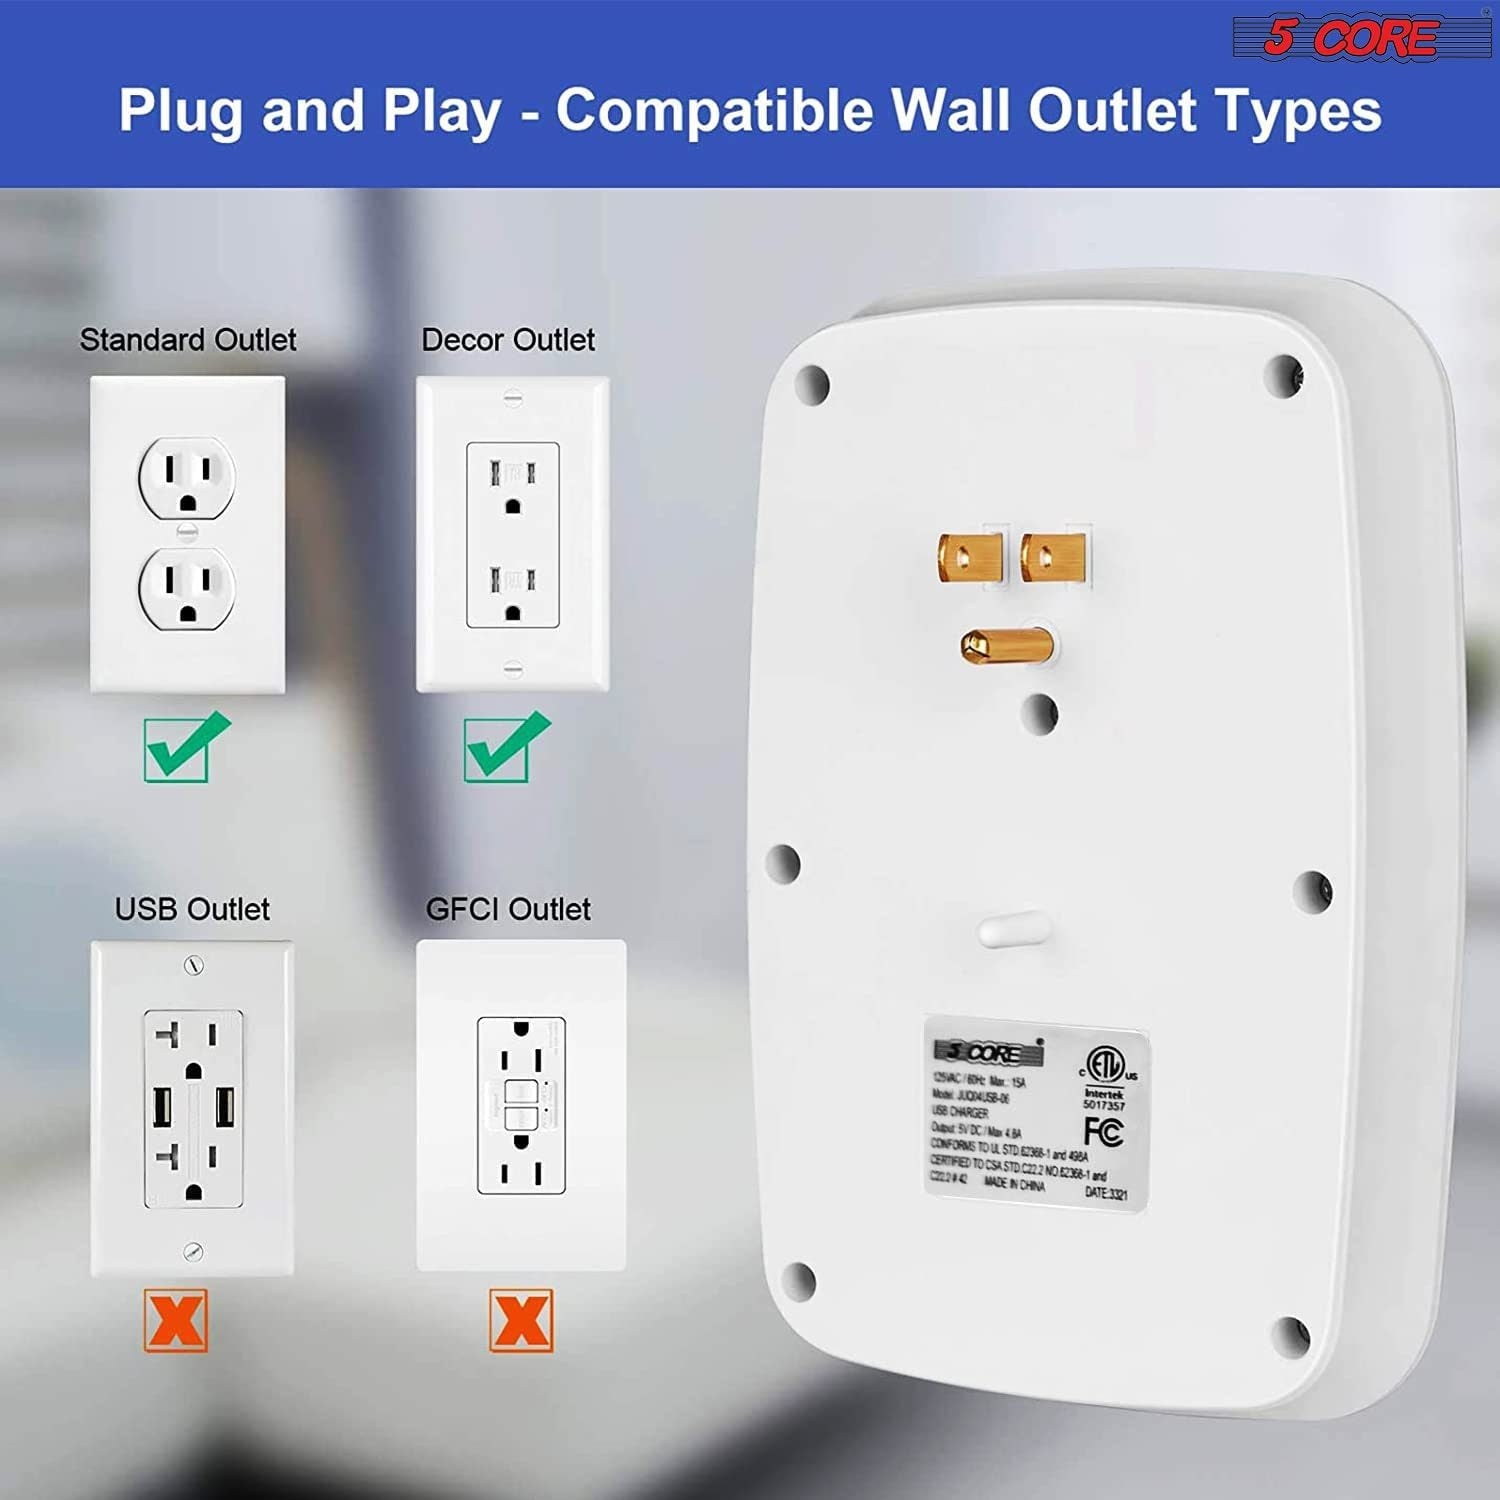 6 Outlet Wall Plug Extender with 4 USB Ports (4.8A Total); Multi Plug Outlet Adapter Wall Surge Protector 15A Electrical Outlet Expander with USB Ports 5 Core WMS 6S 4USB - Moorescarts